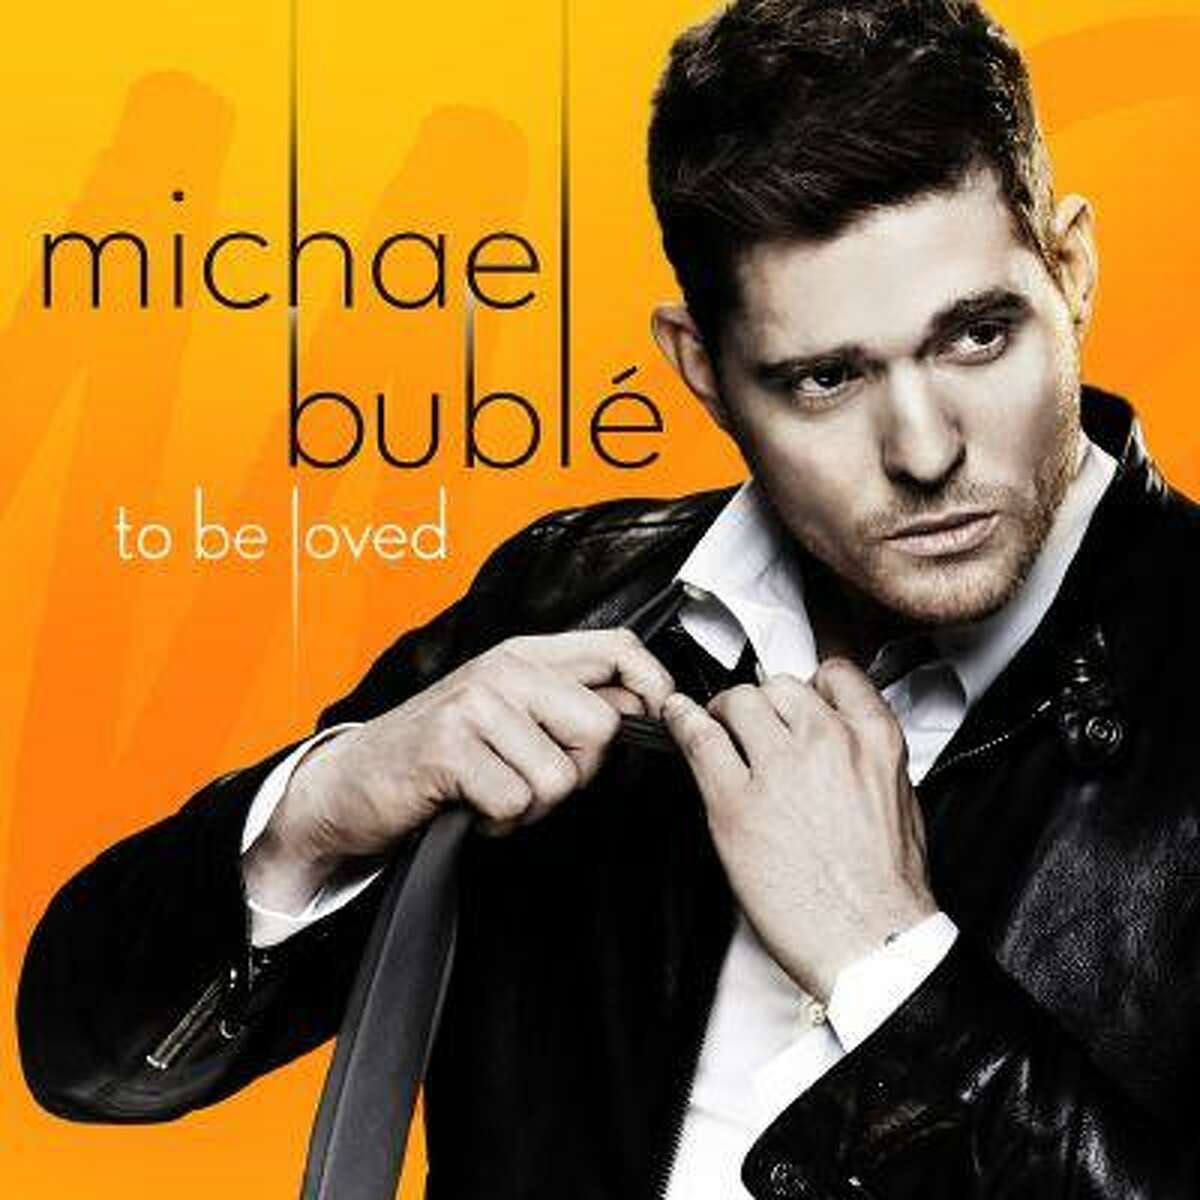 This CD cover image released by Reprise shows the latest release by Michael Buble, "To Be Loved." (AP Photo/Reprise)